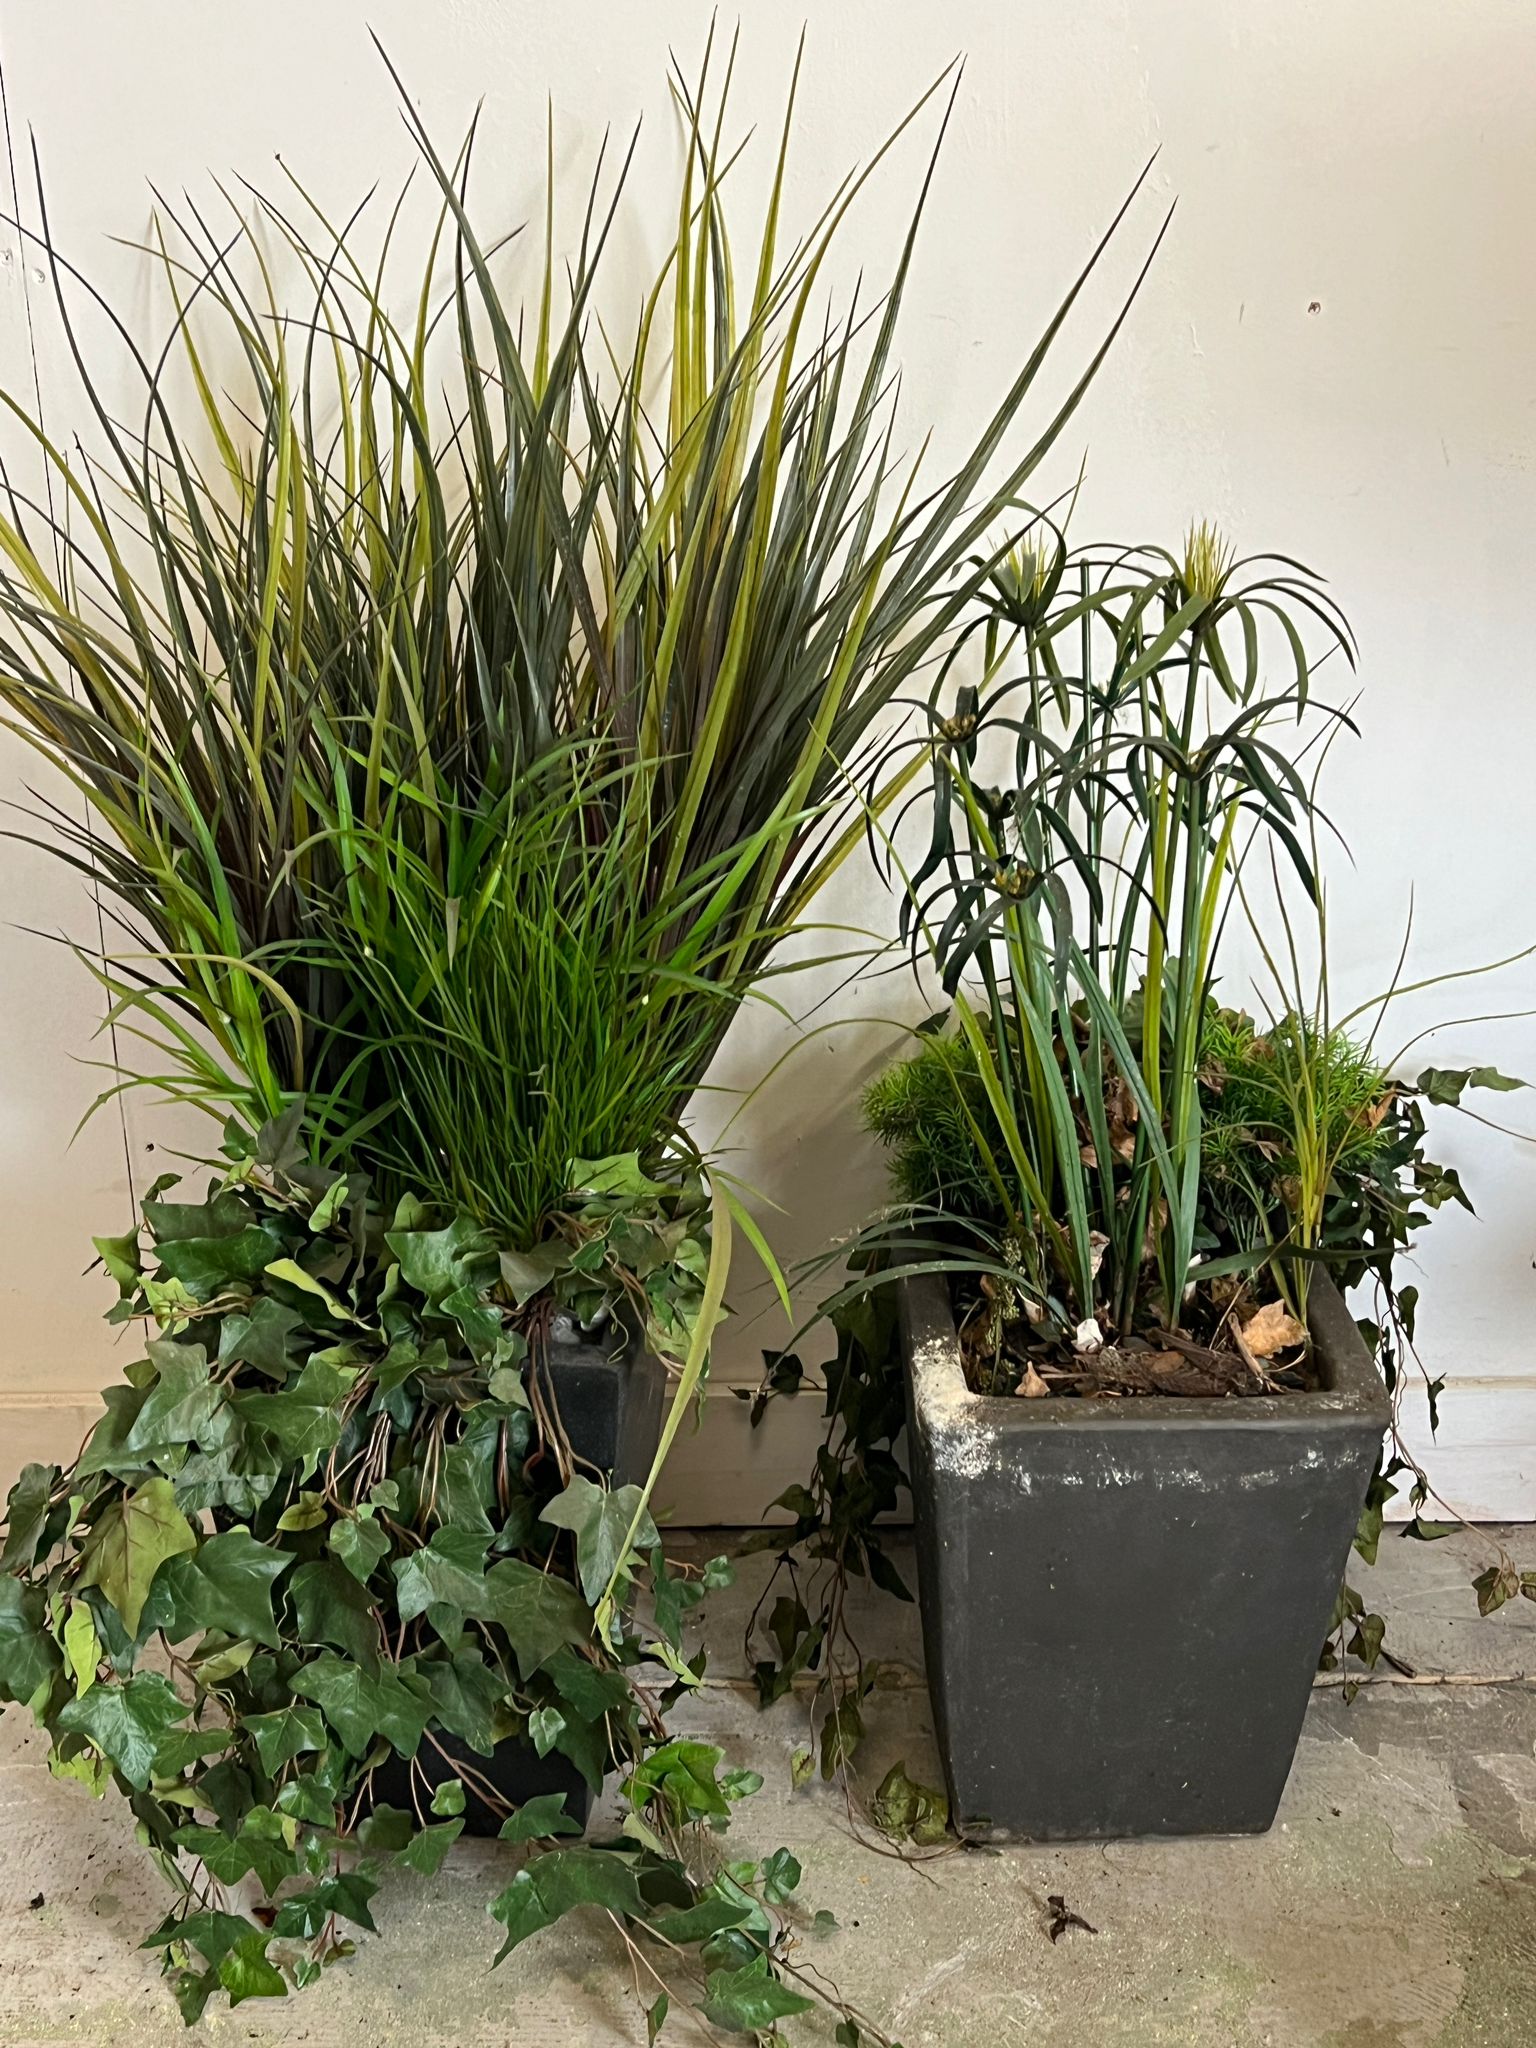 Two planters with artificial plants (H34cm and H37cm)